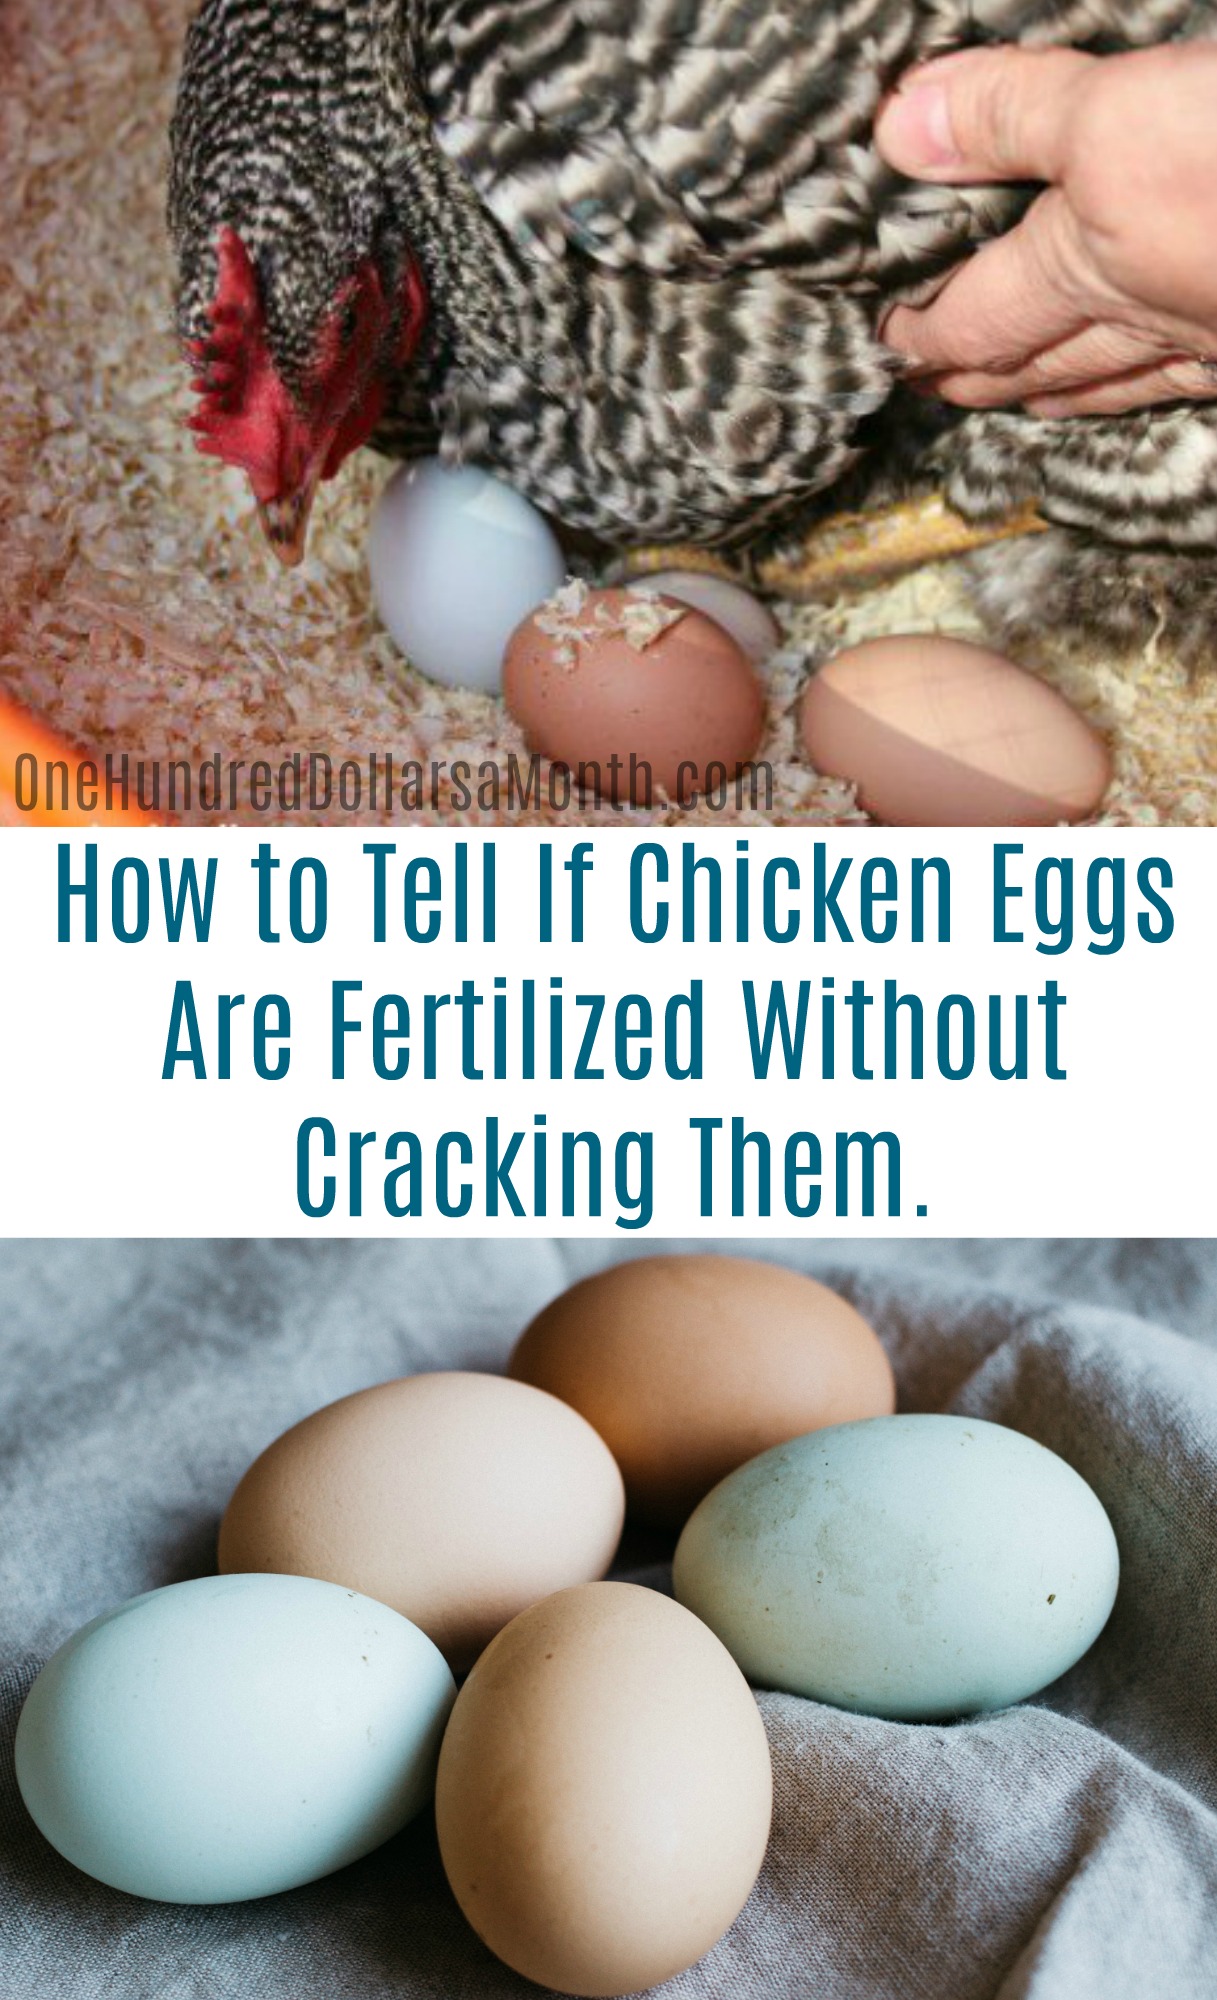 How Can I Tell If My Chicken Eggs Are Fertilized Without Cracking Them?